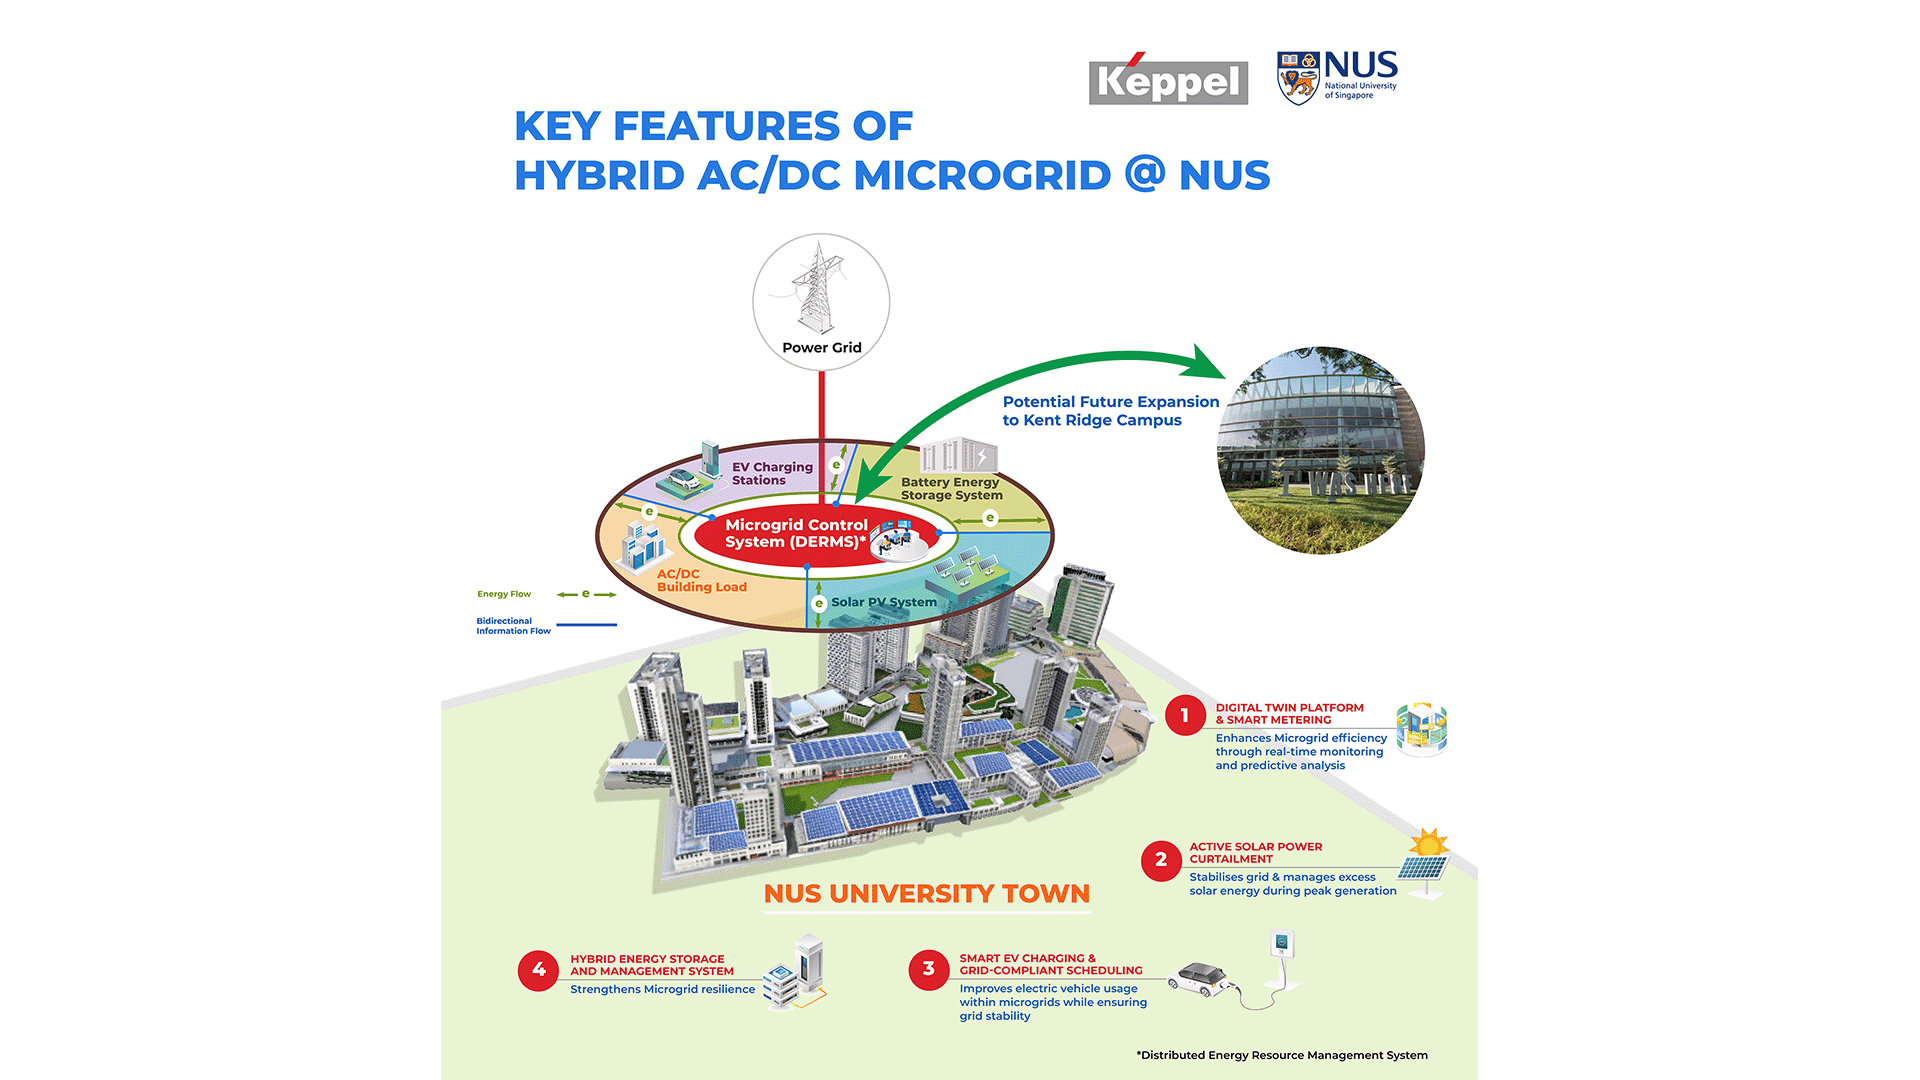 As part of the Keppel-NUS living lab collaboration, a novel AC/DC hybrid microgrid will be tested and implemented at NUS University Town. Credit: Keppel Corporation